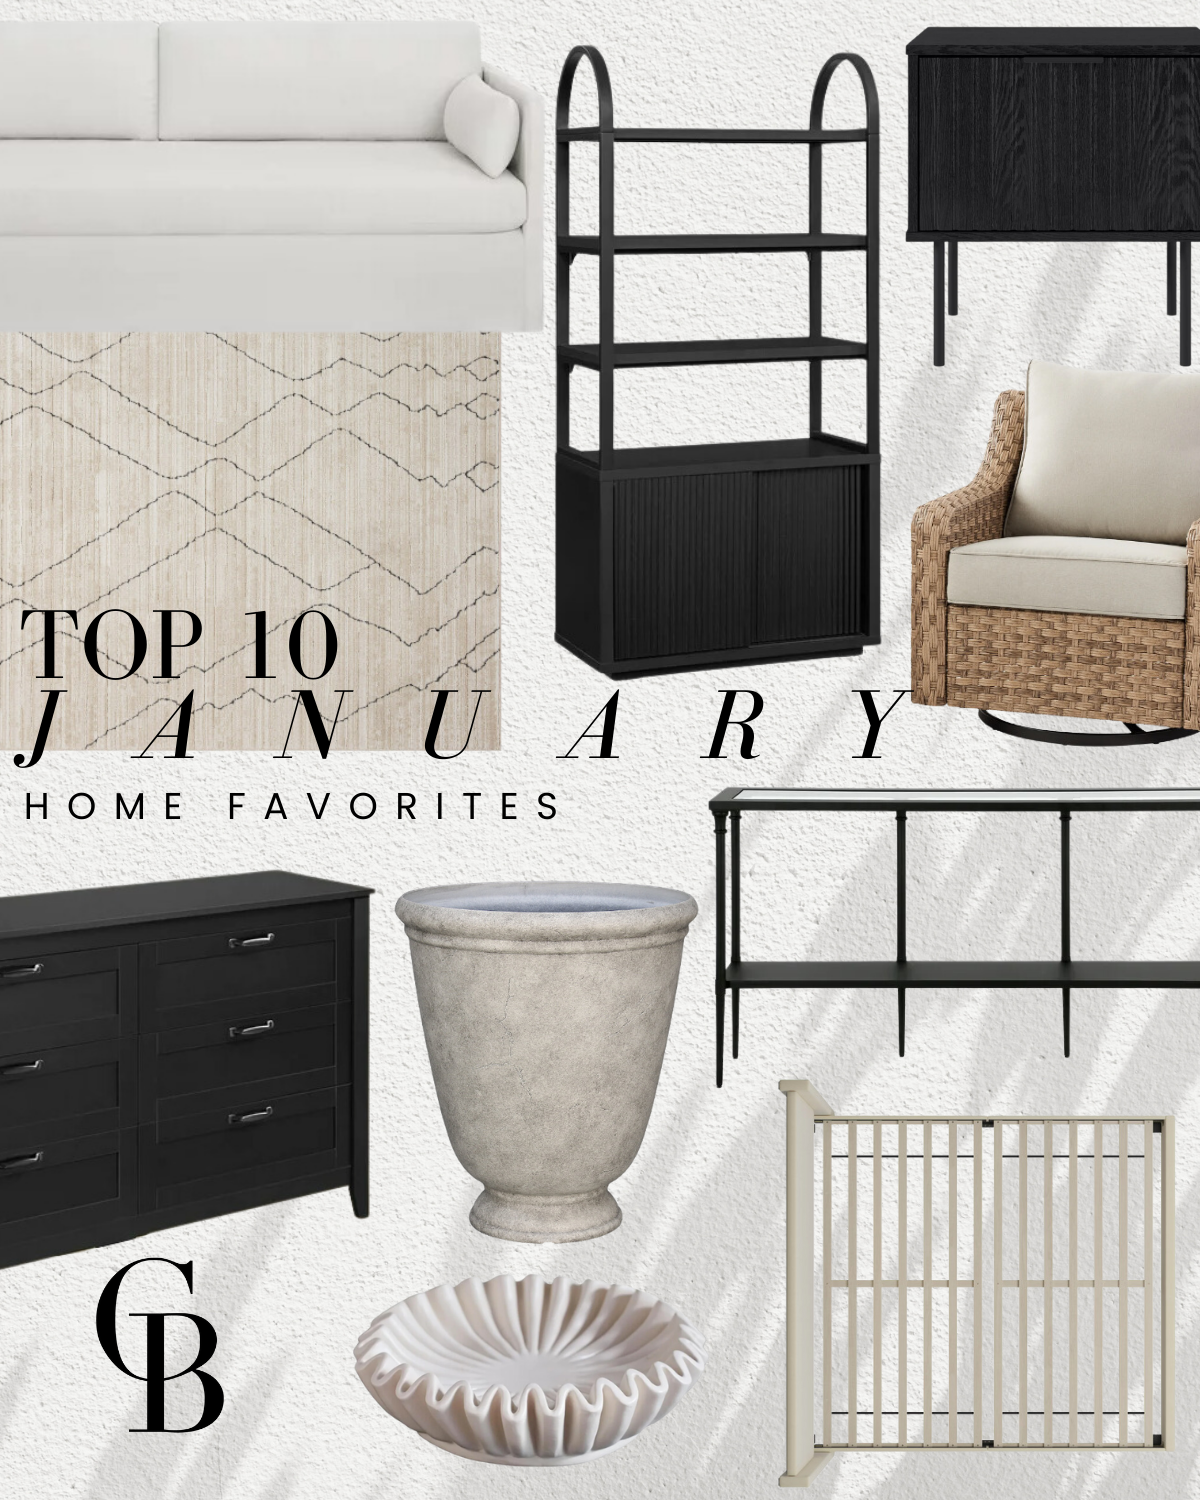 january top-selling home favorites | home, home favorites, home finds, best-selling, area rug, bookshelf, swivel chair, outdoor decor, home furniture